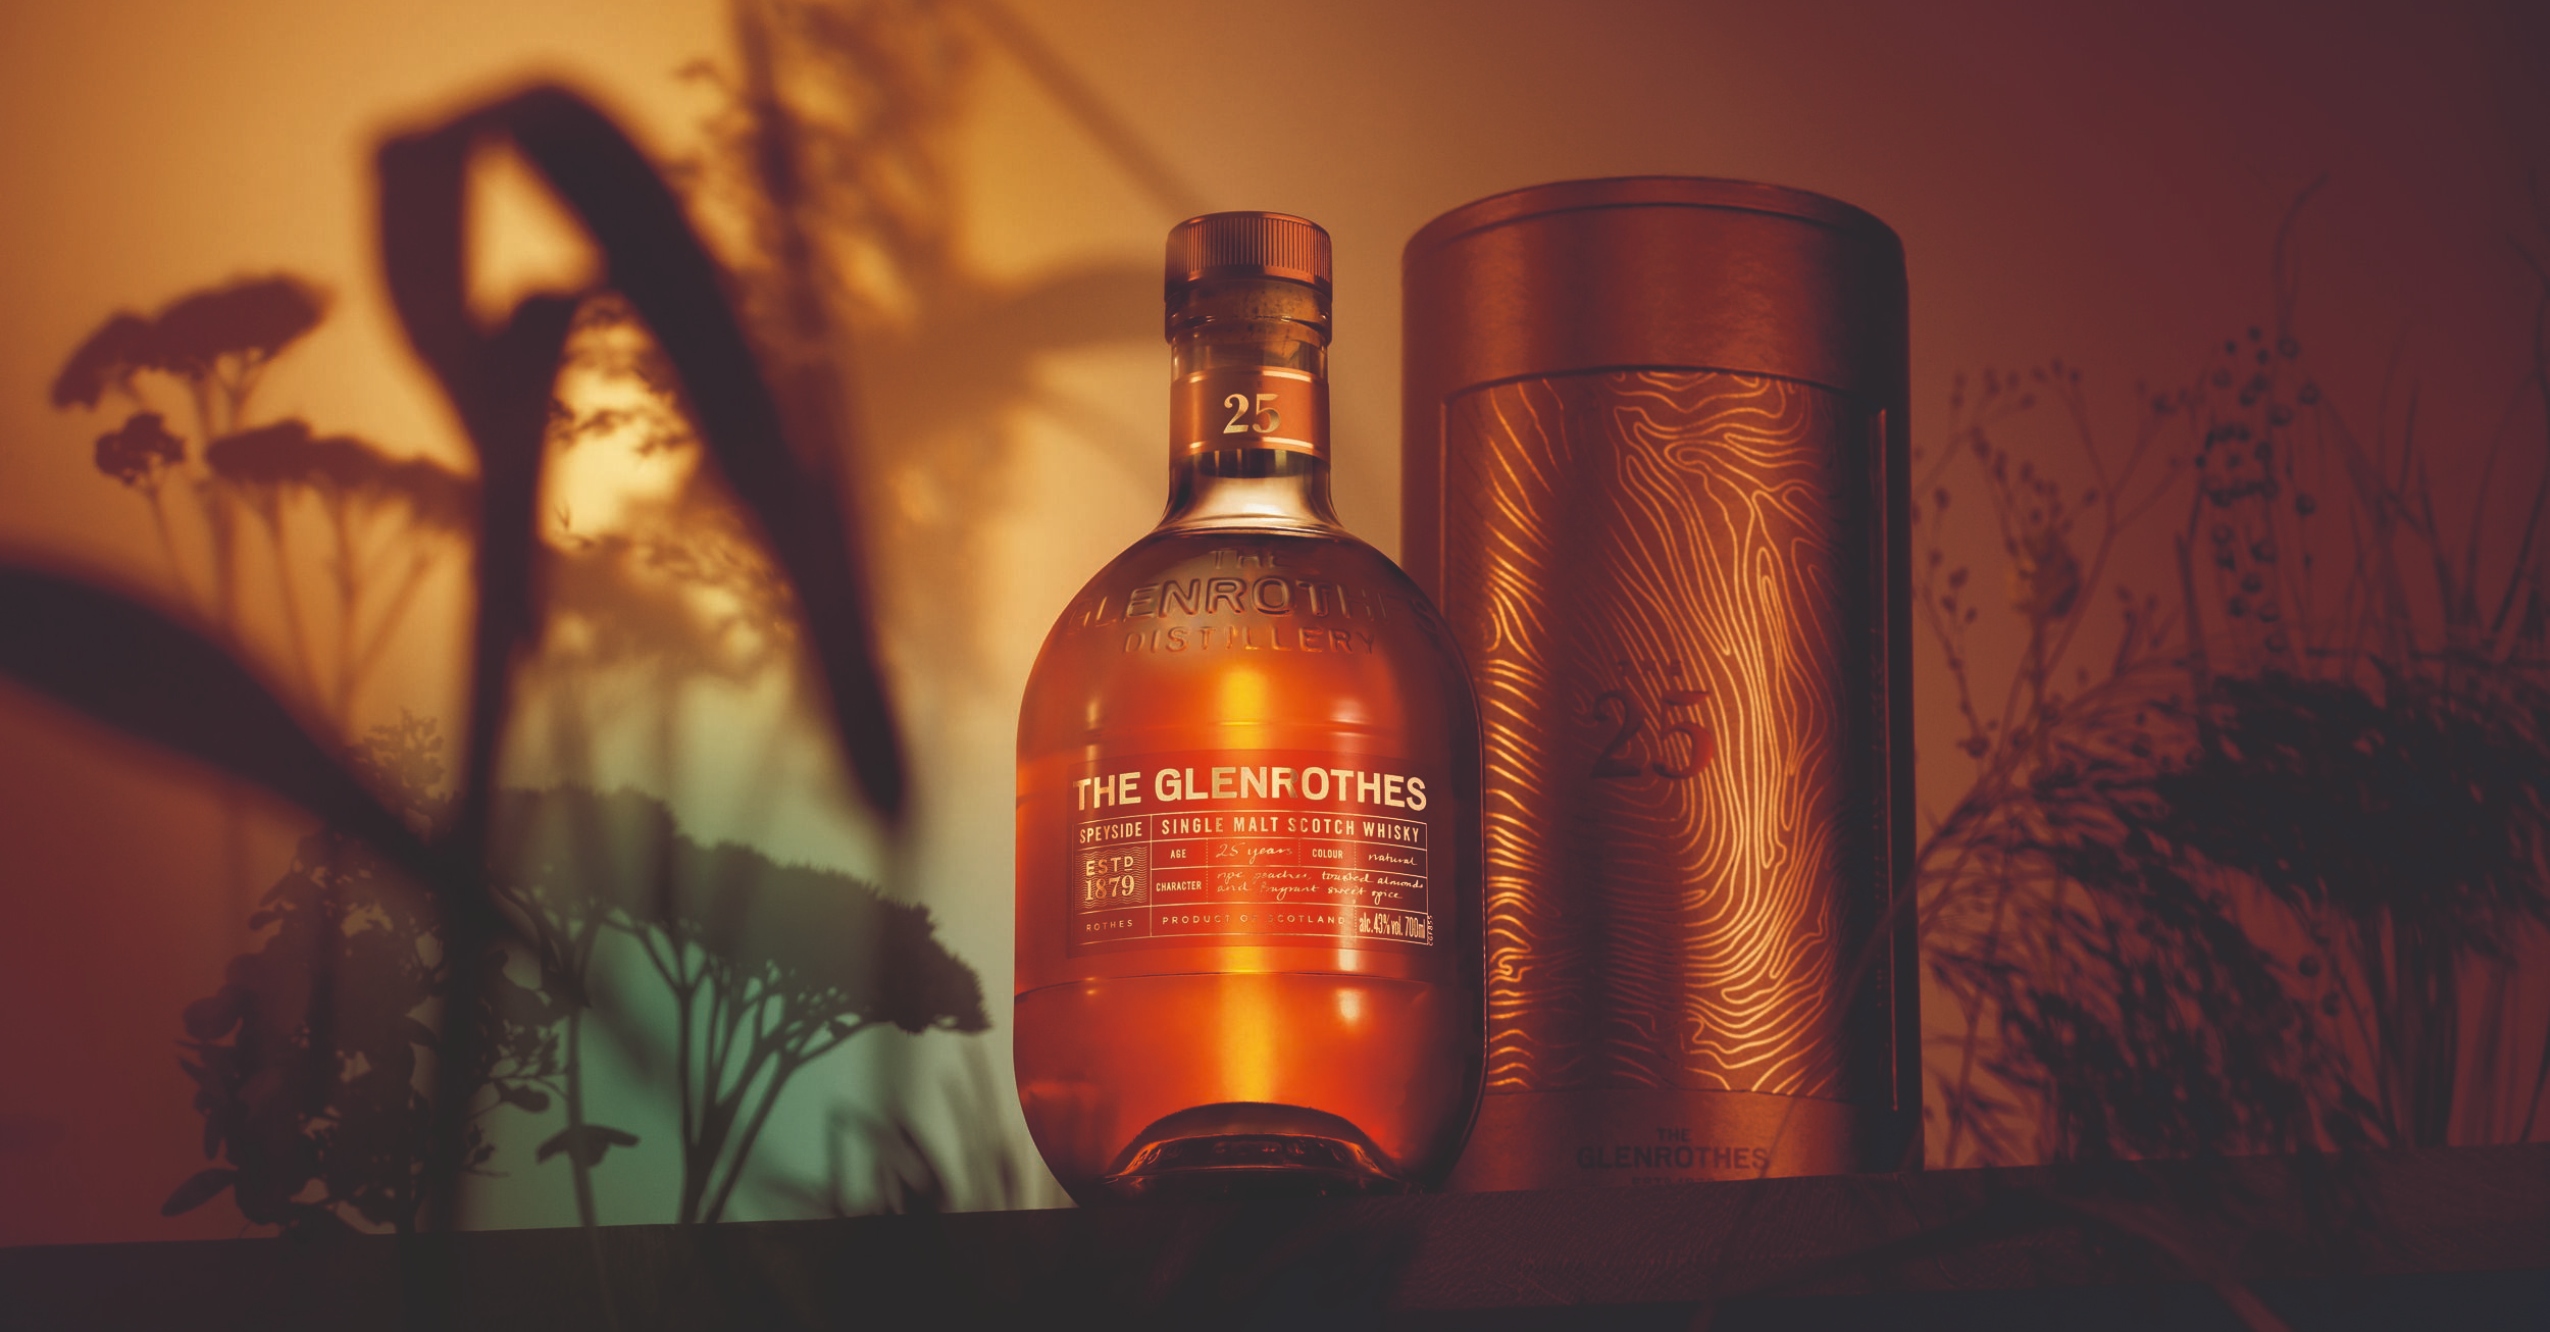 The Glenrothes 25 Scotch Feature The Glenrothes Debuts 25-Year-Old Scotch Whisky